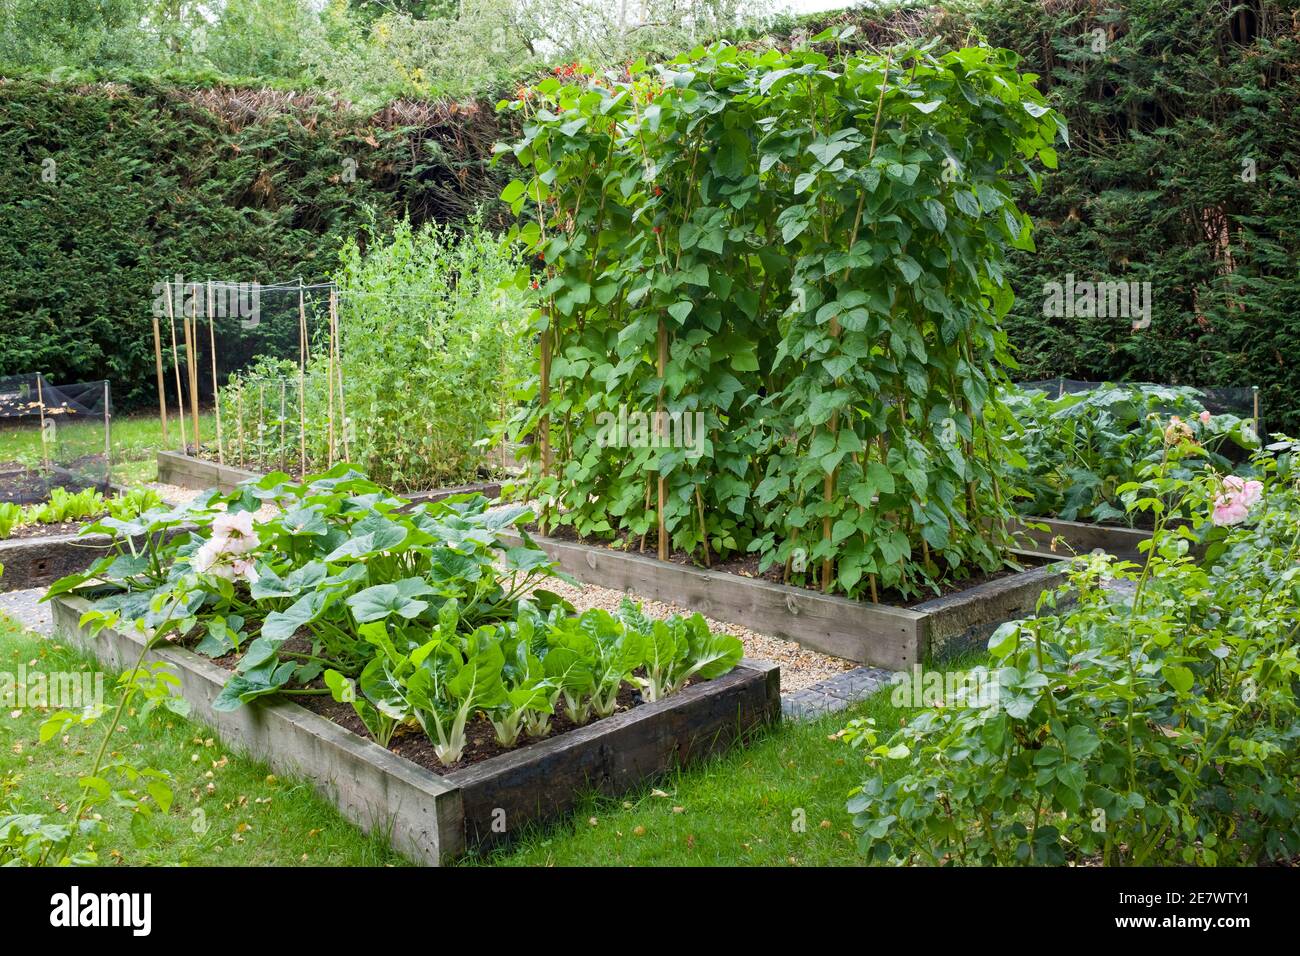 Vegetable patch with raised beds in a large English garden, UK Stock Photo